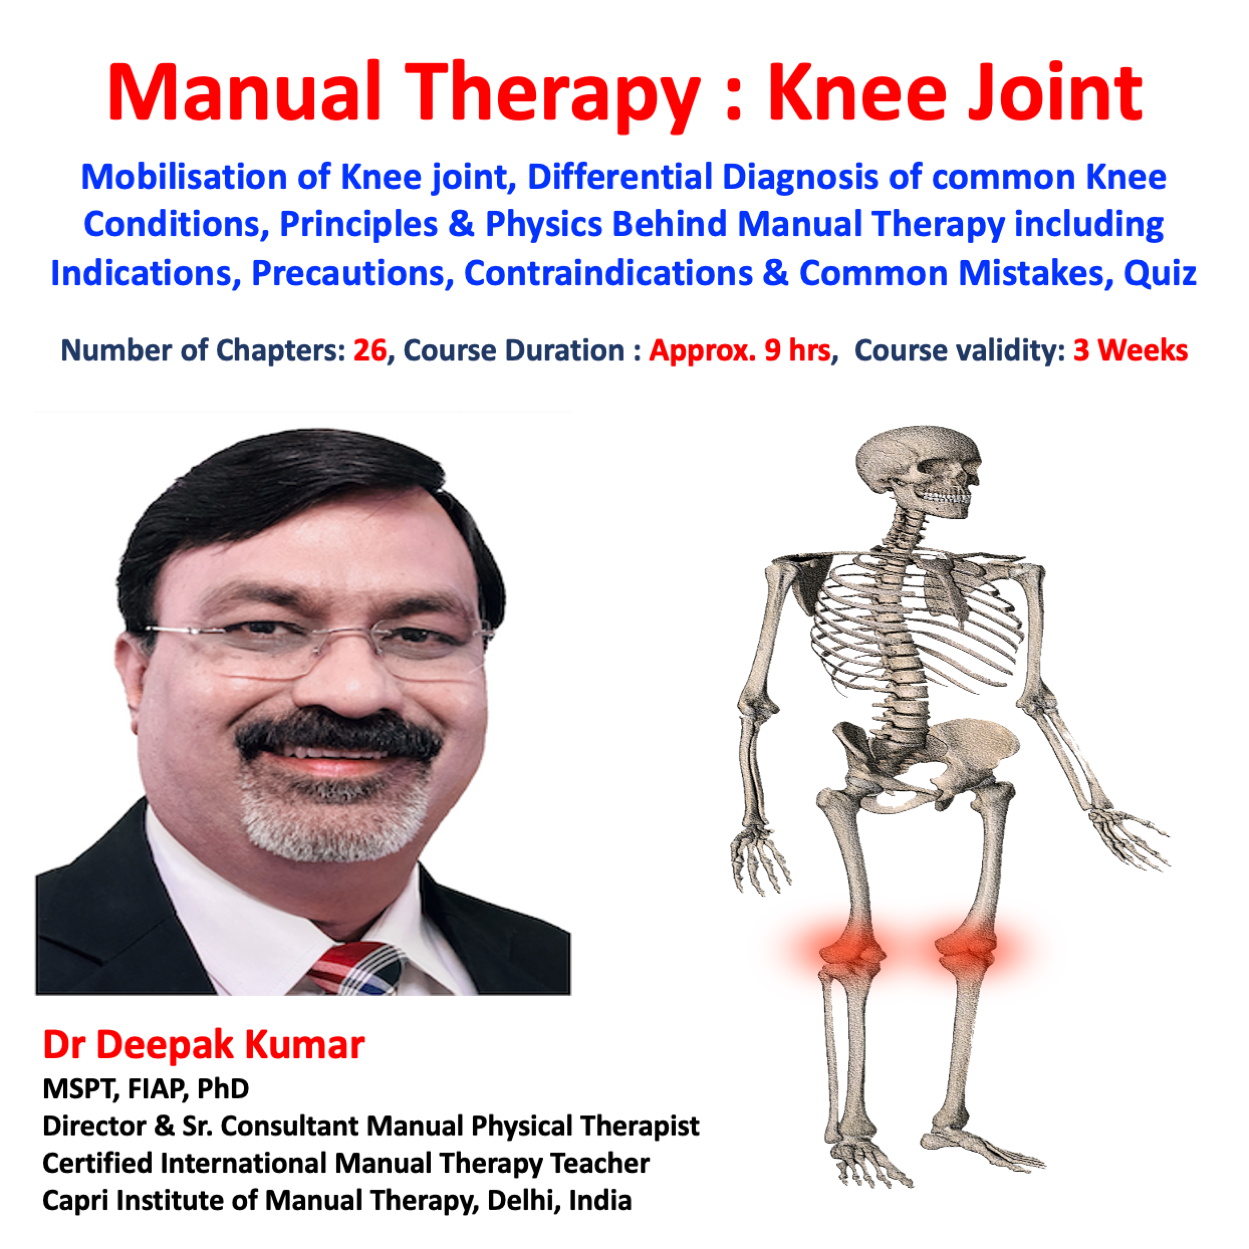 Manual Therapy: Knee Joint